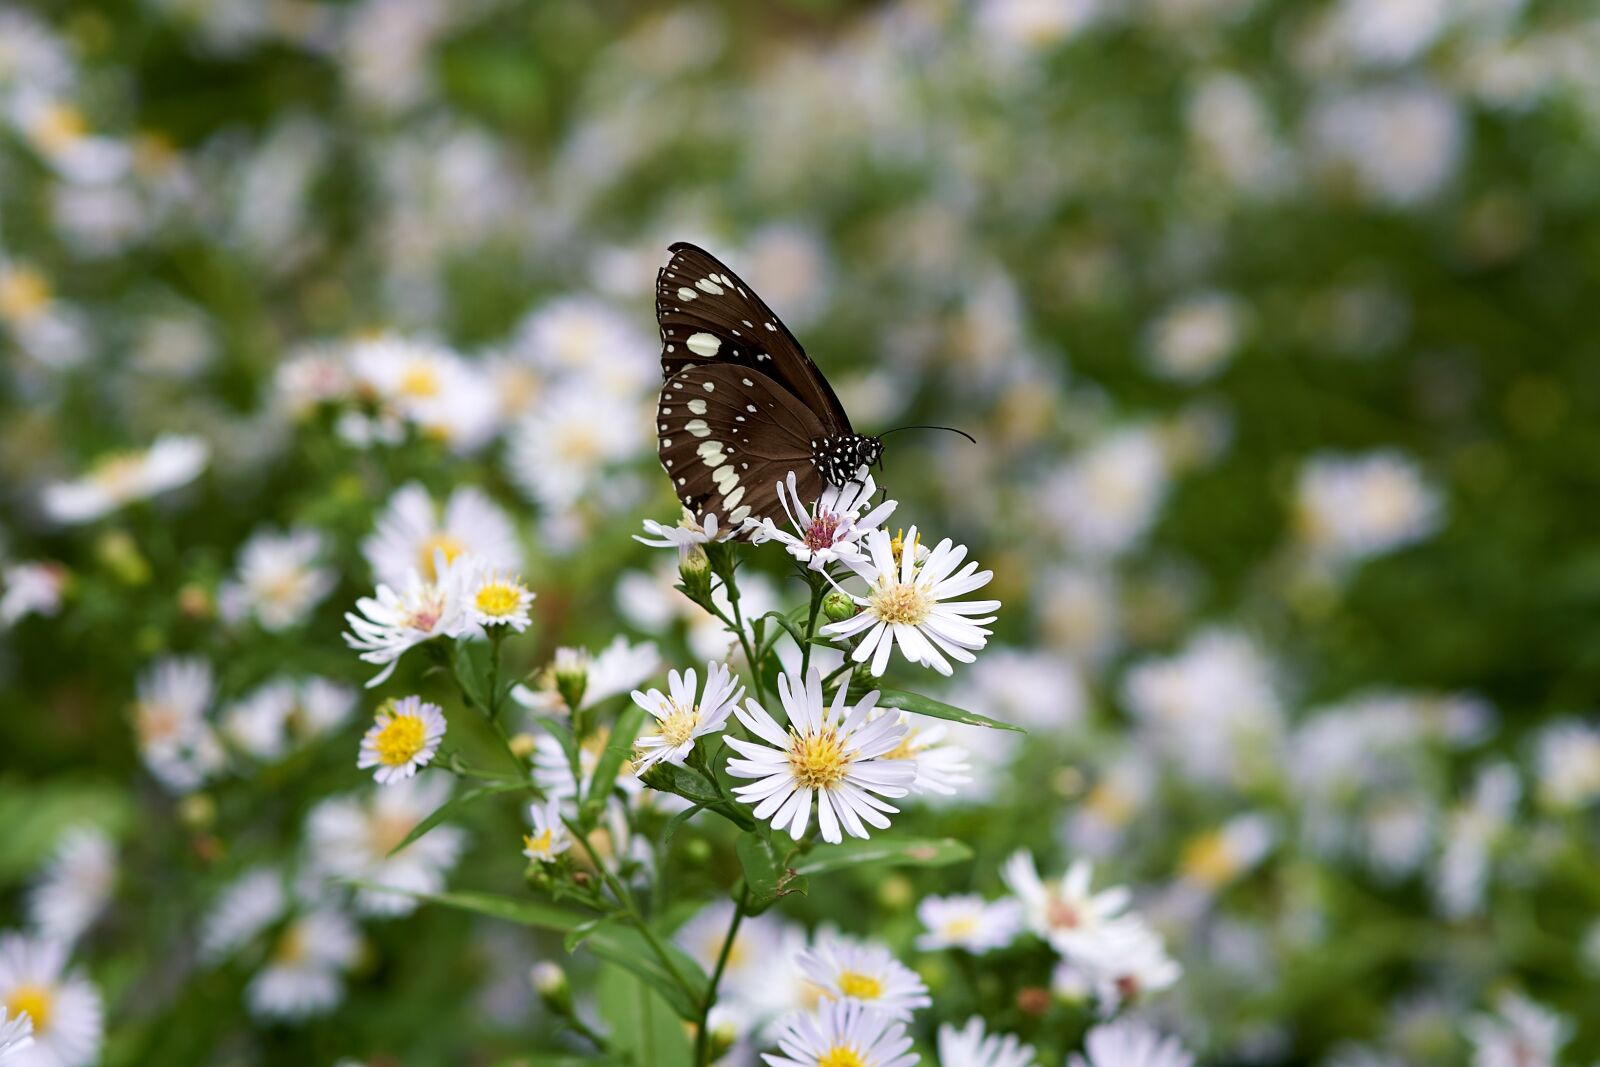 Sony a7 III sample photo. Butterfly, flowers, nature photography